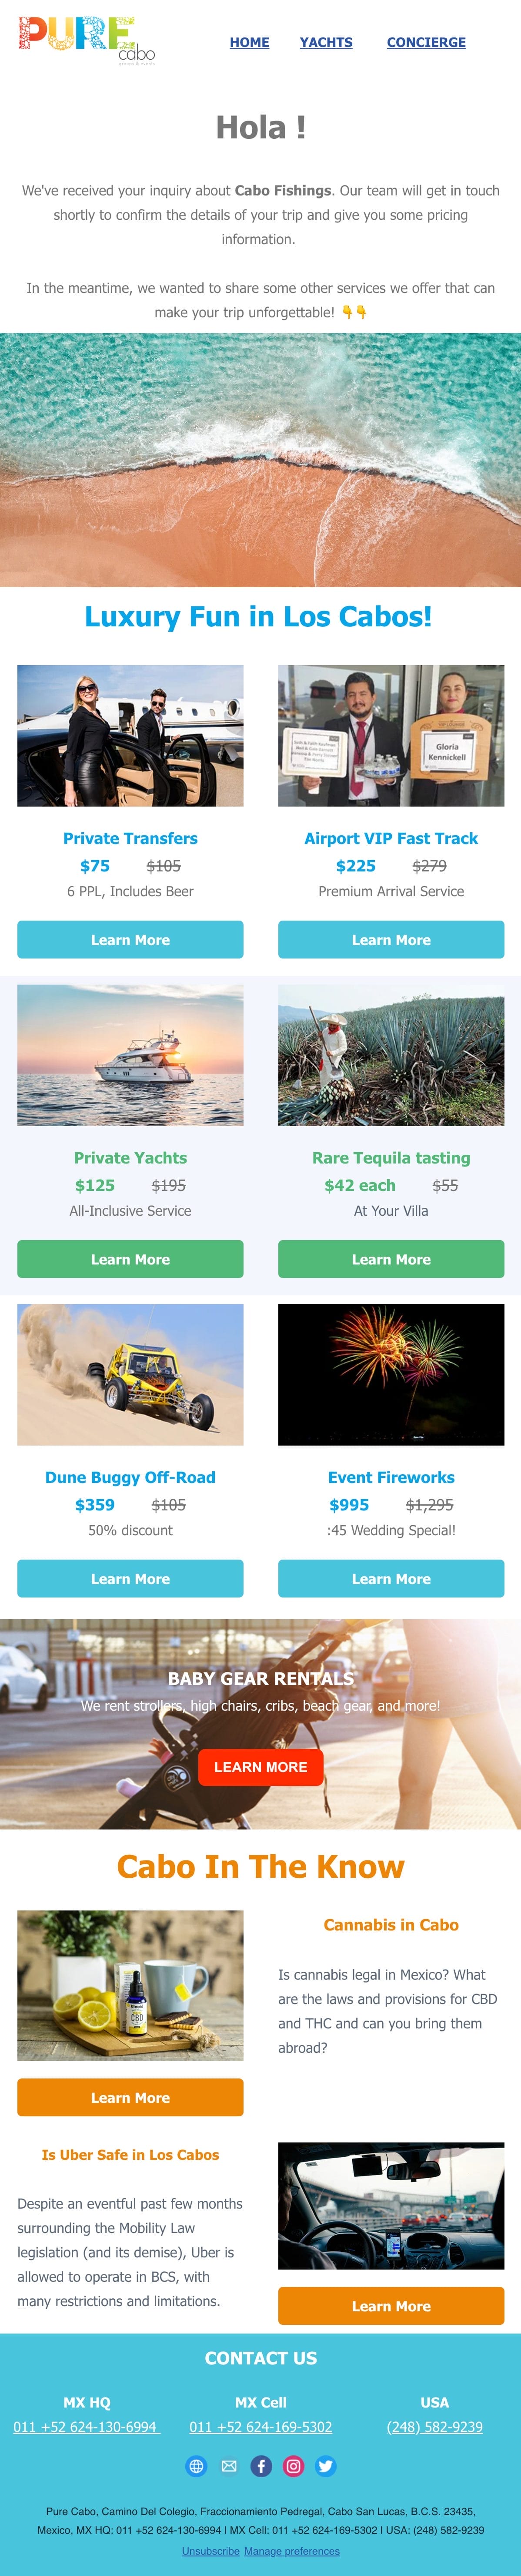 Pure Cabo marketing emails featuring their top services.